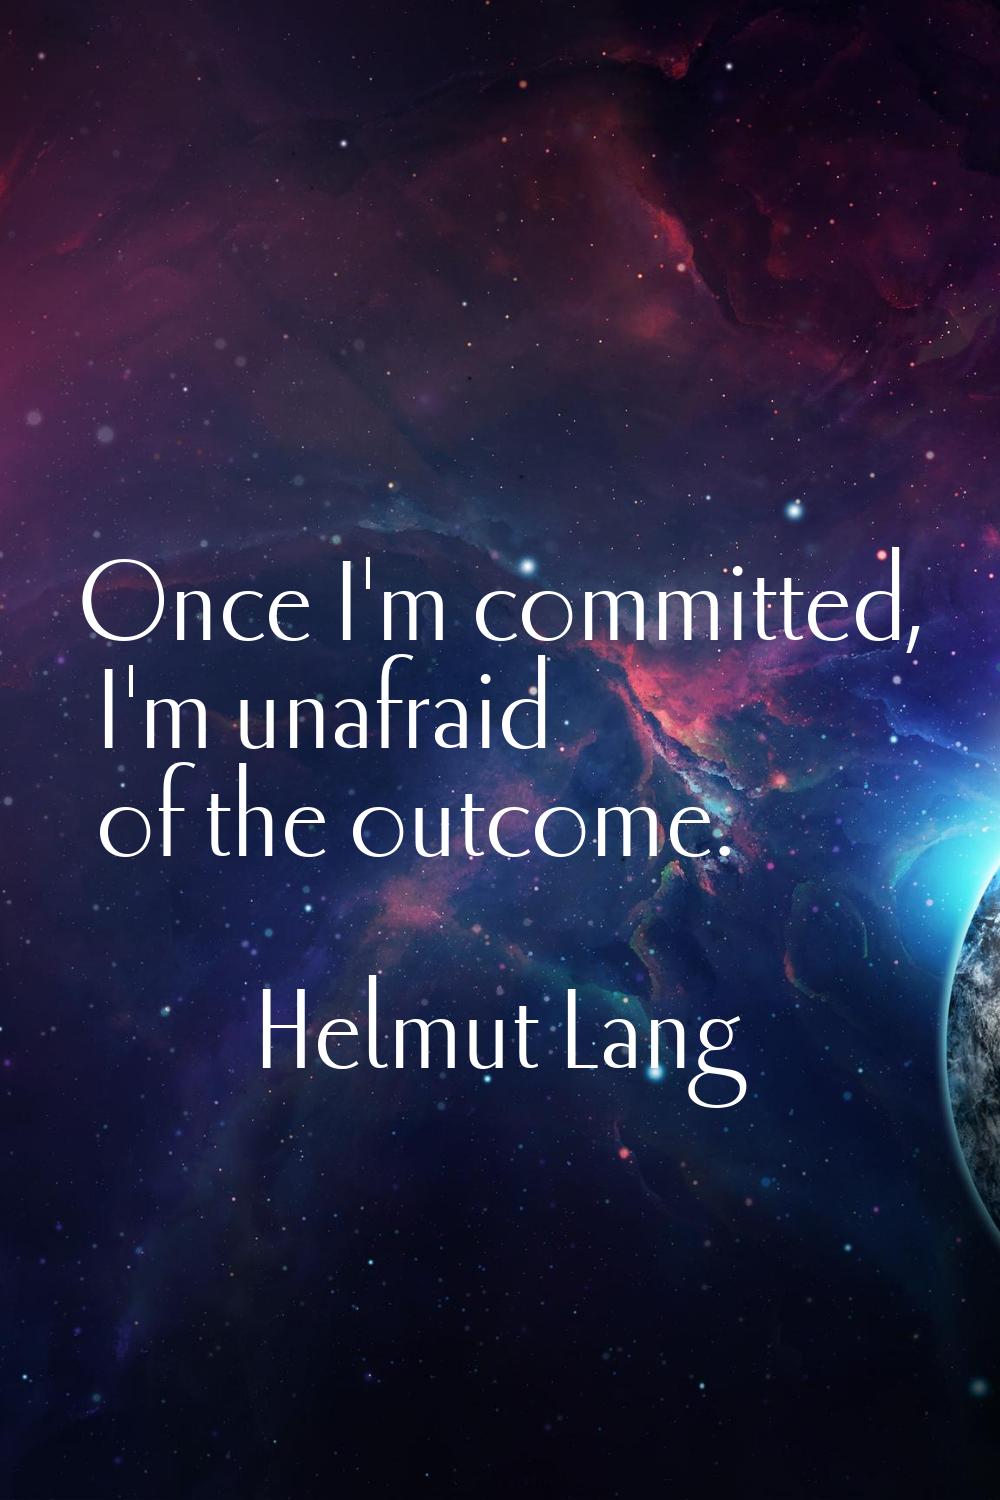 Once I'm committed, I'm unafraid of the outcome.